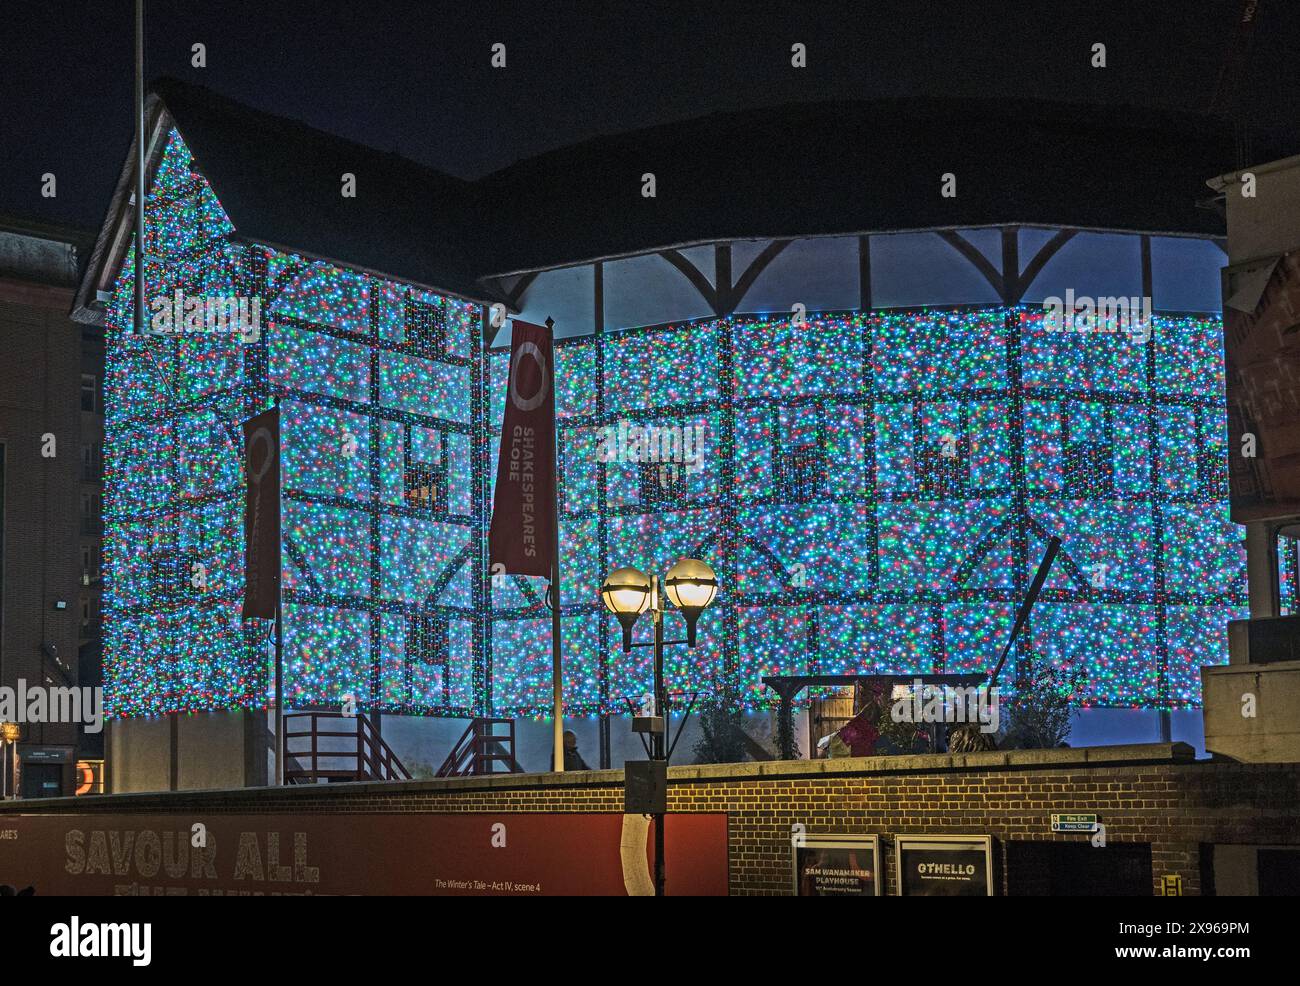 Shakespeare's Globe Theatre, Christmas Lights, Londres, Angleterre, Royaume-Uni, Europe Banque D'Images